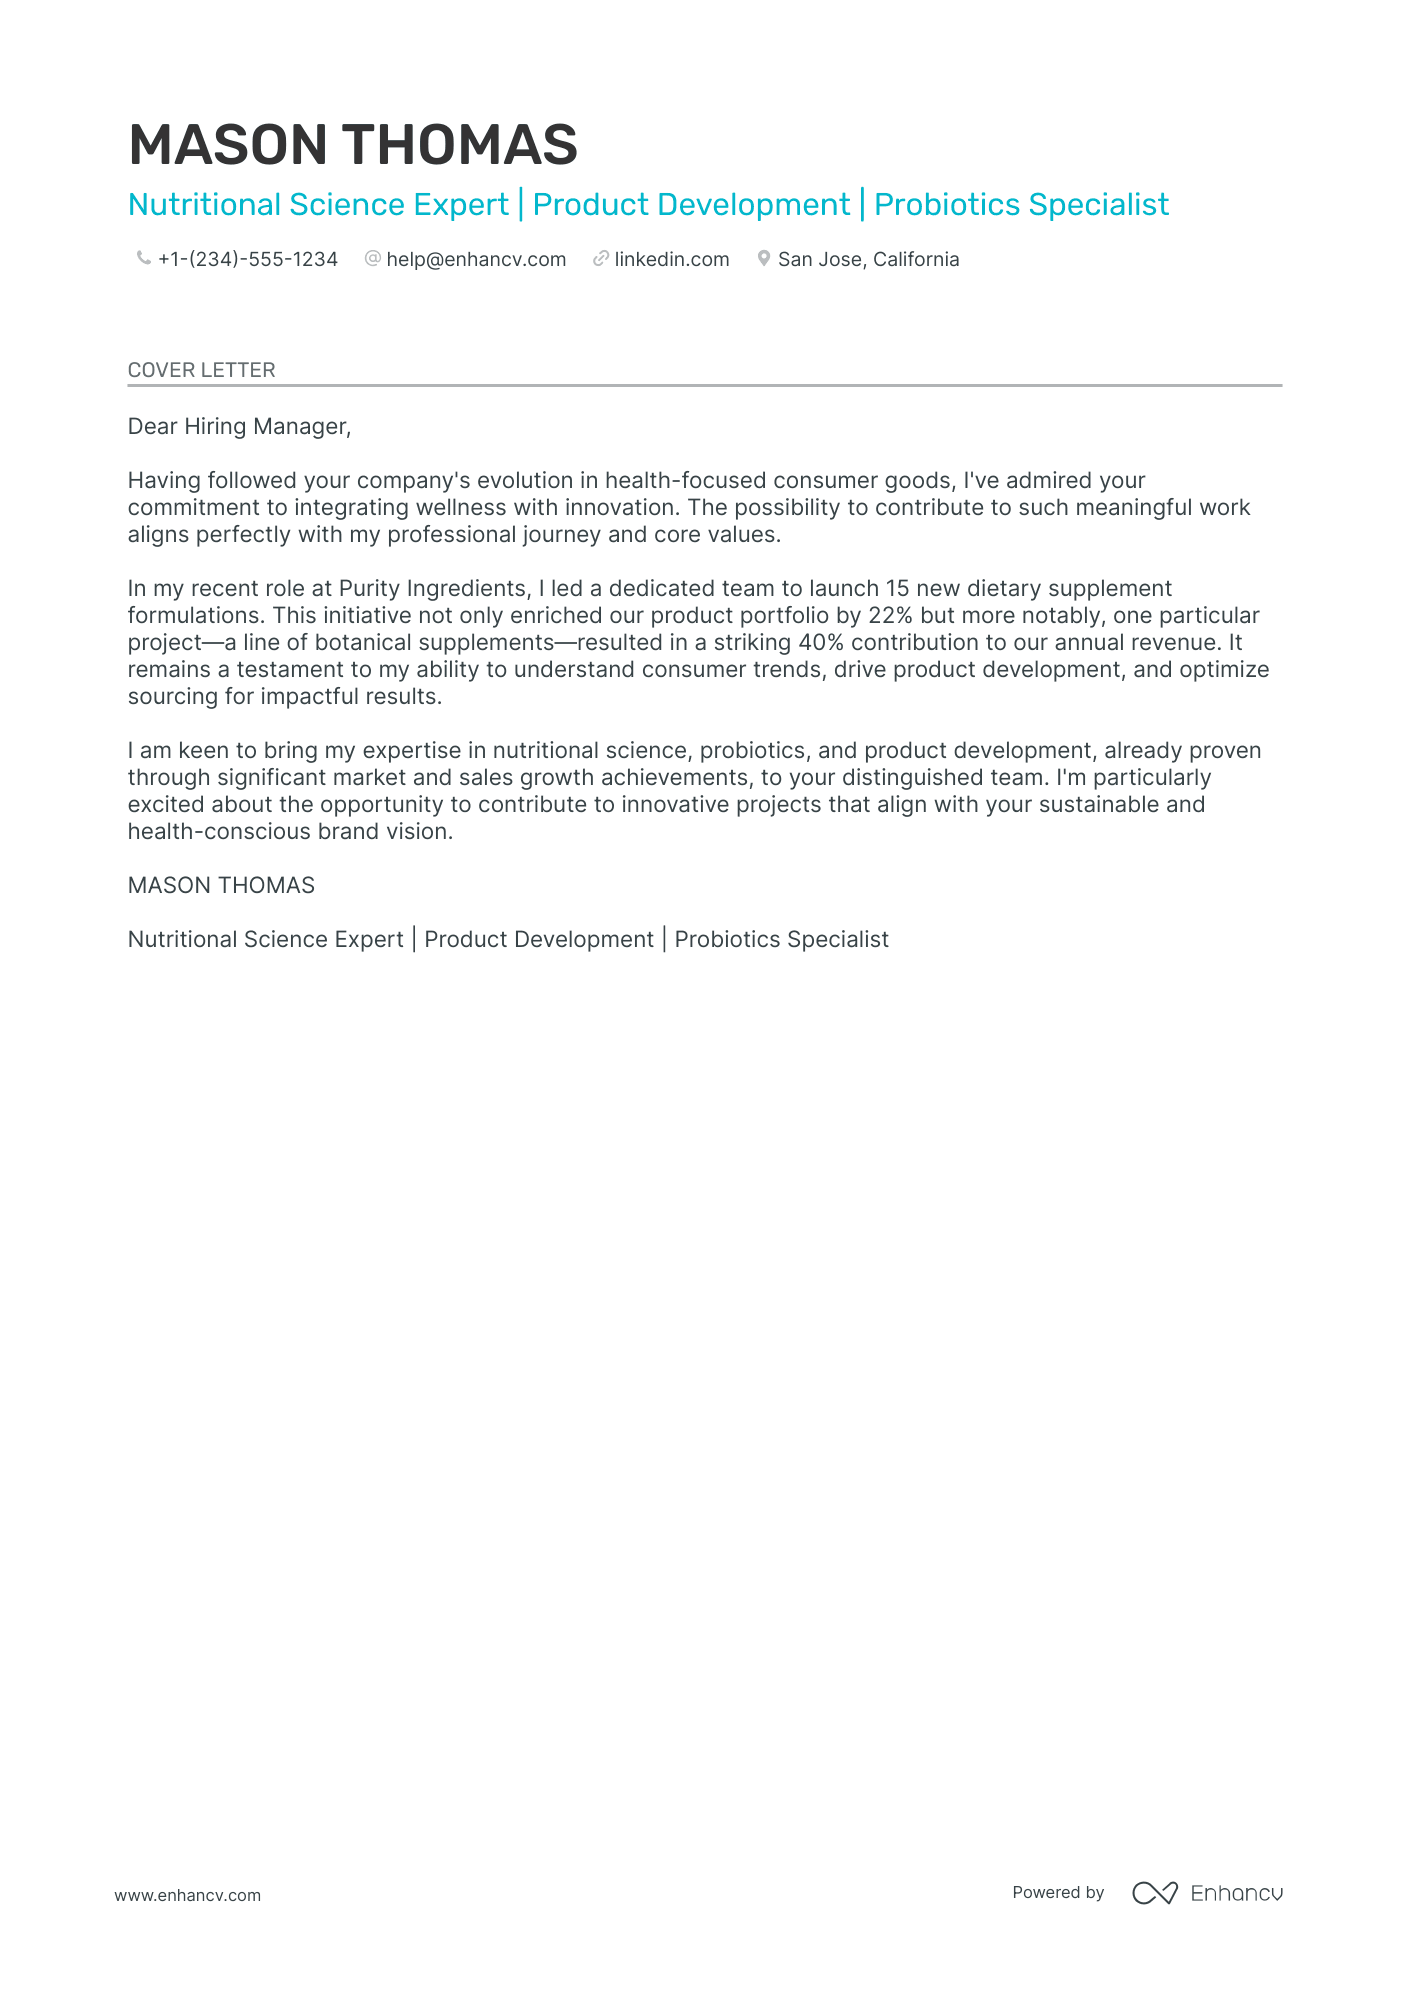 application letter for it director